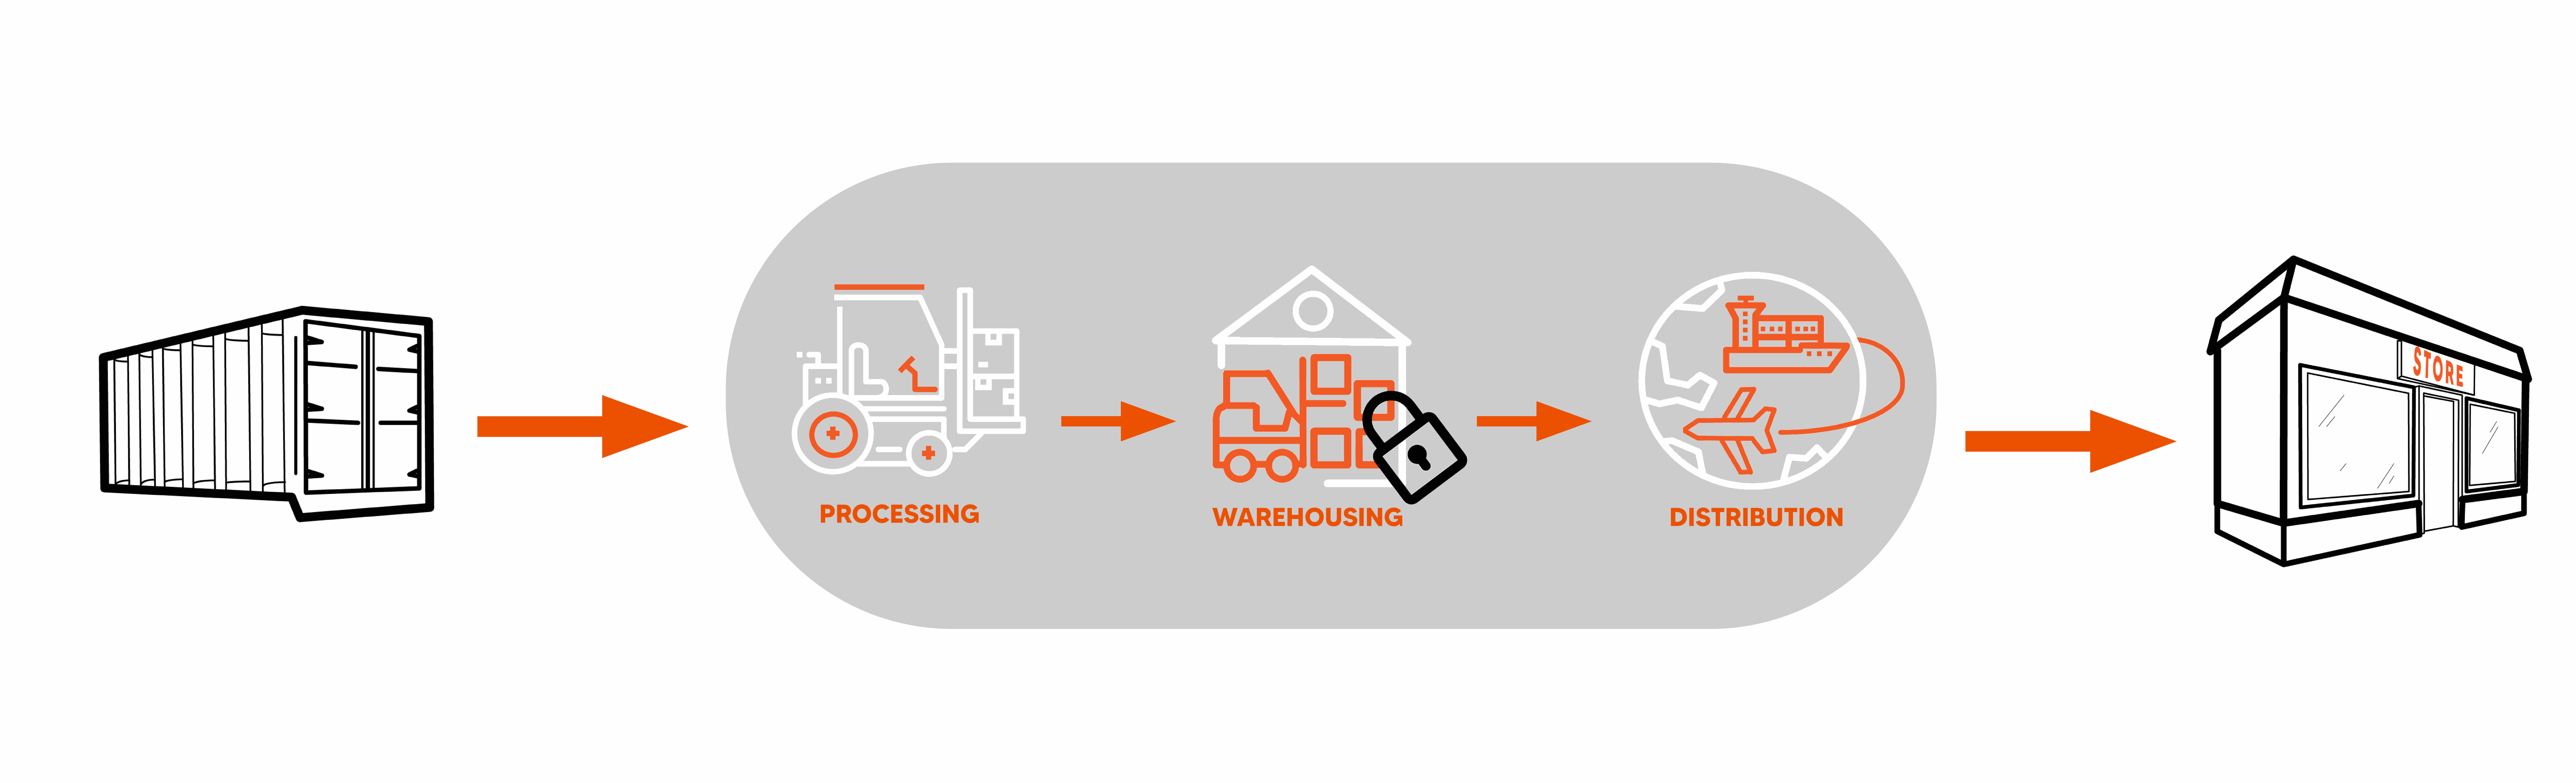 Vector art flow diagram of a corrugated box, forklift and storefront